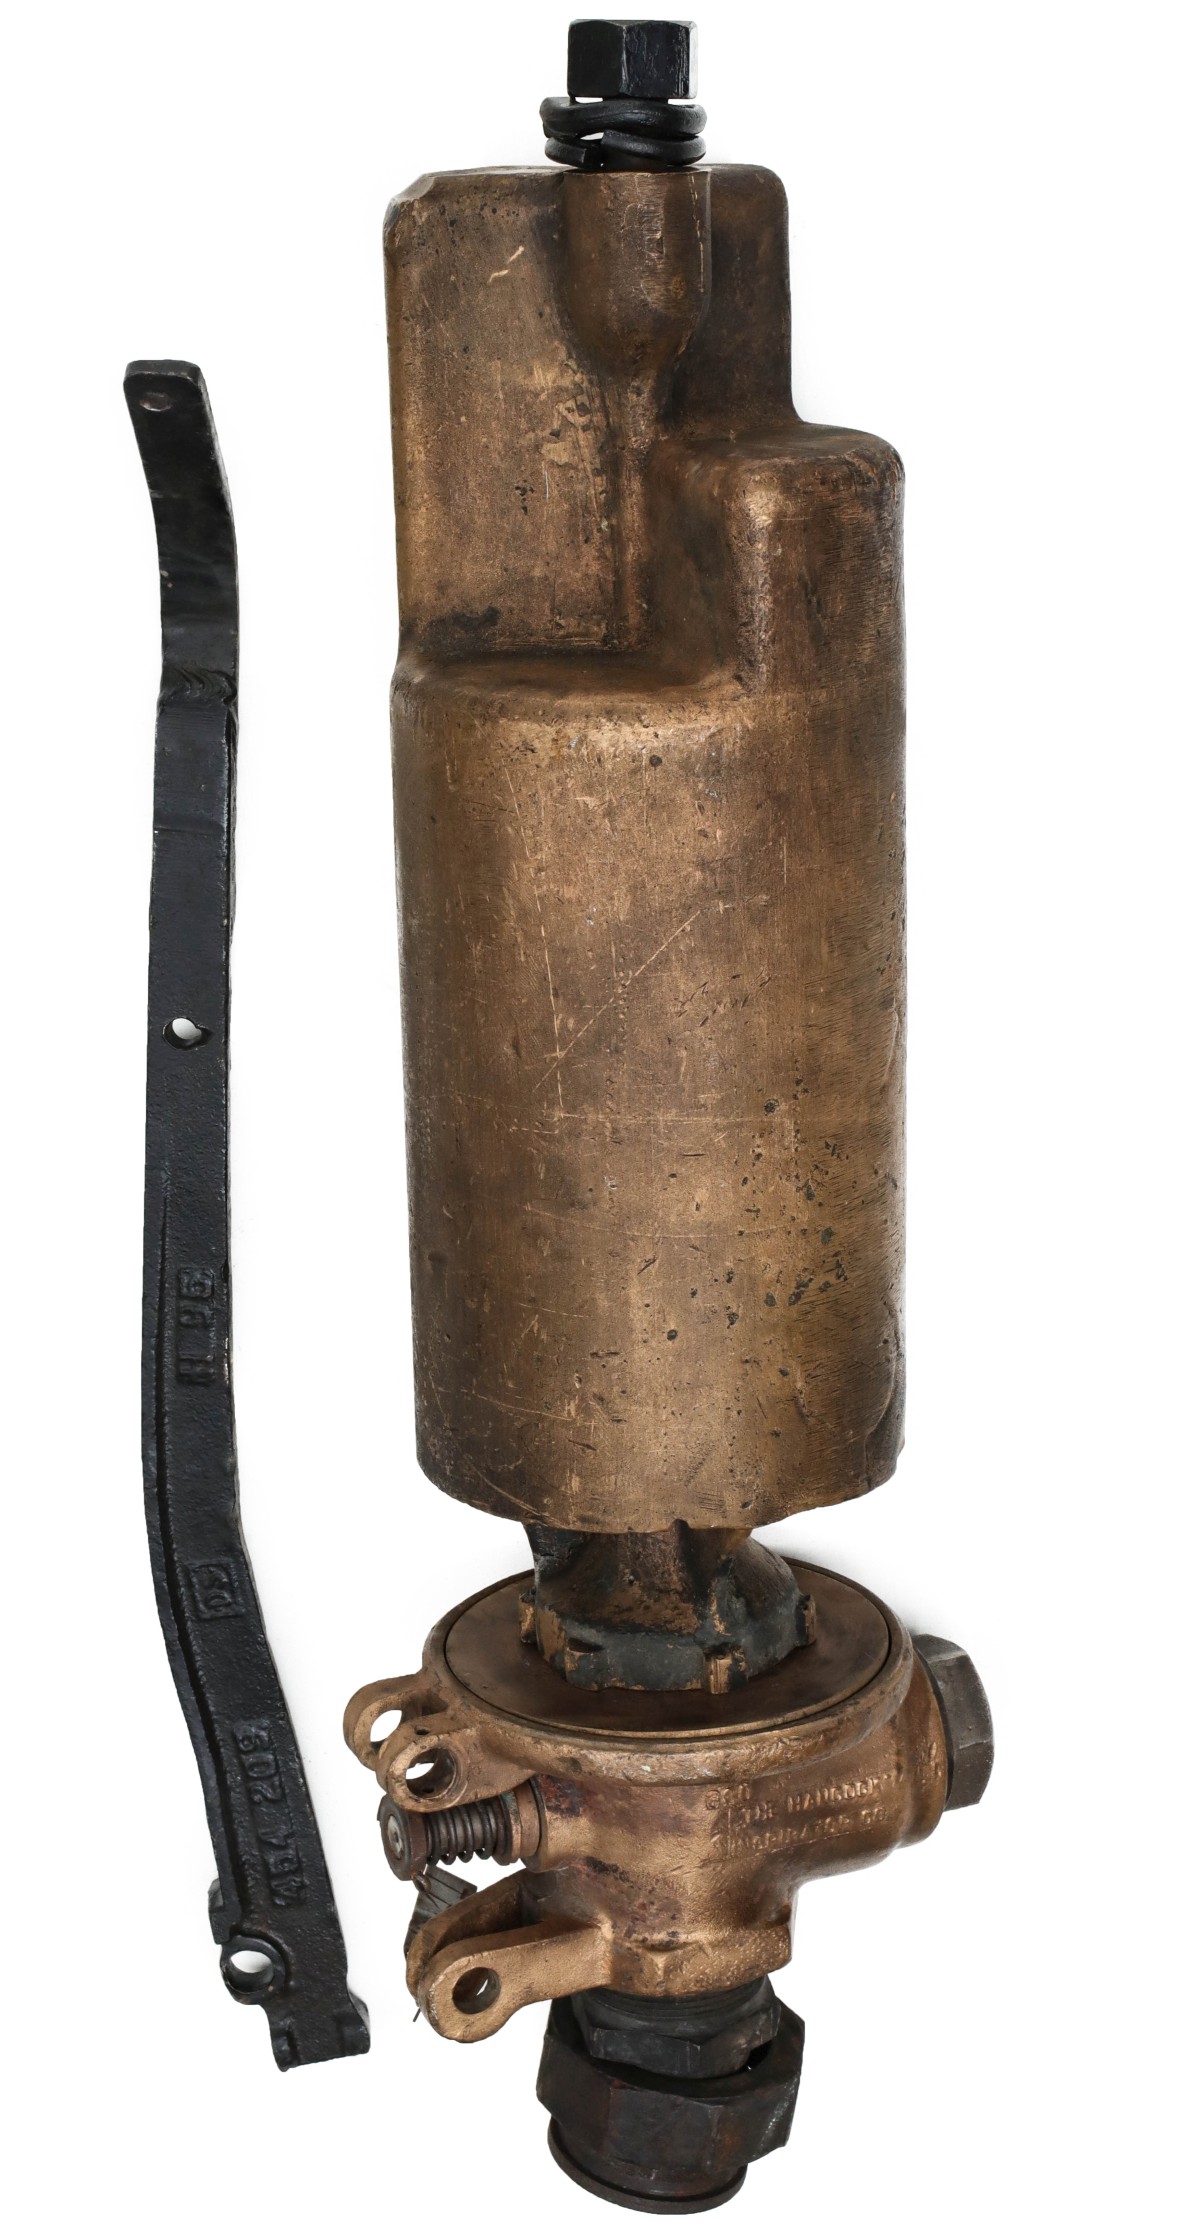 A LARGE THREE CHIME STEP TOP BRASS LOCOMOTIVE WHISTLE